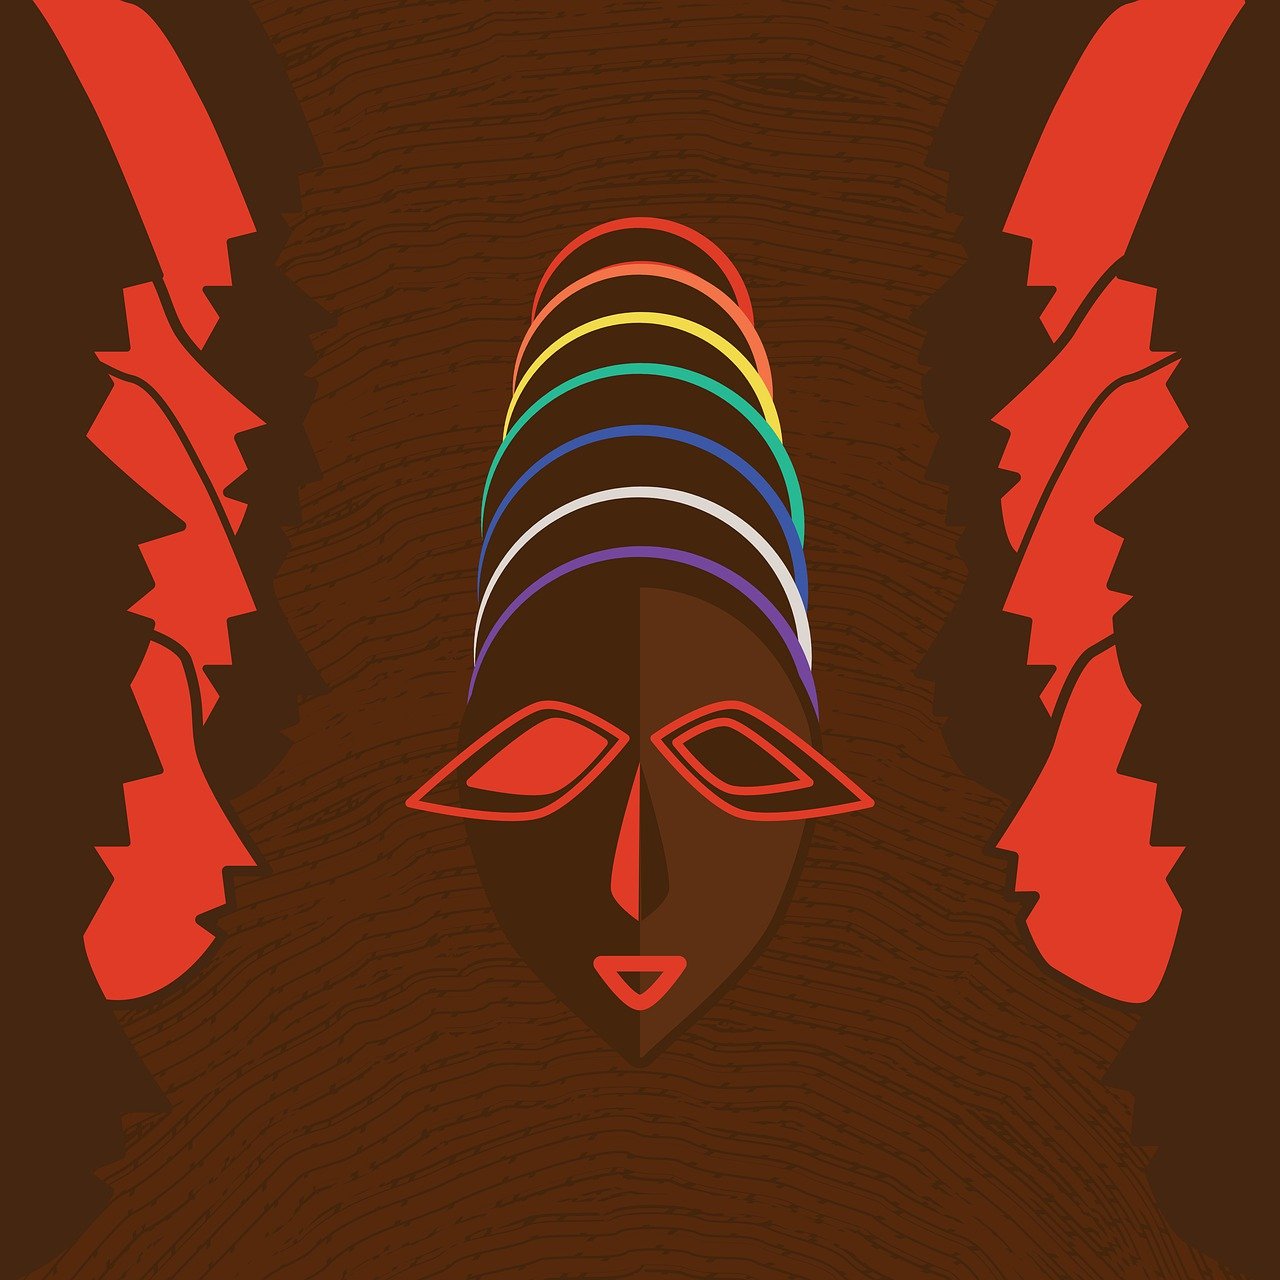 a woman with a colorful hat on her head, a digital rendering, afrofuturism, west africa mask patterns style, red and brown color scheme, miami. illustration